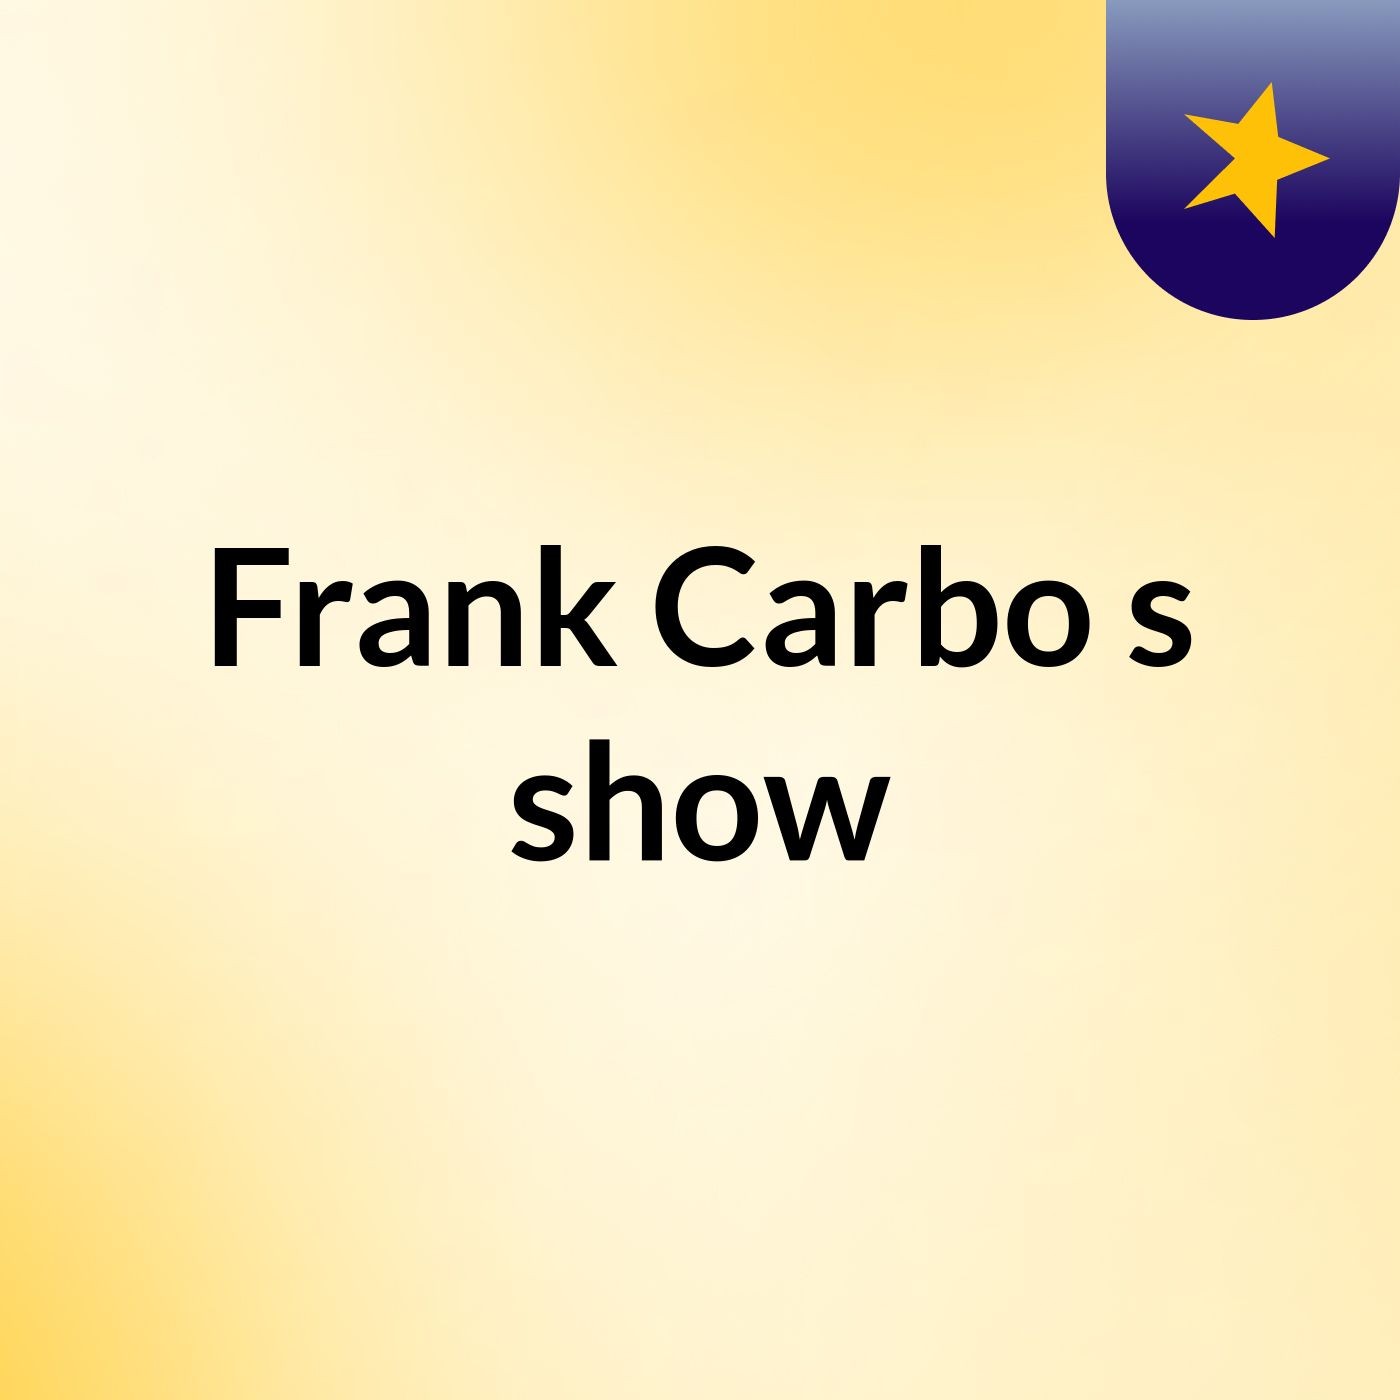 Frank Carbo's show